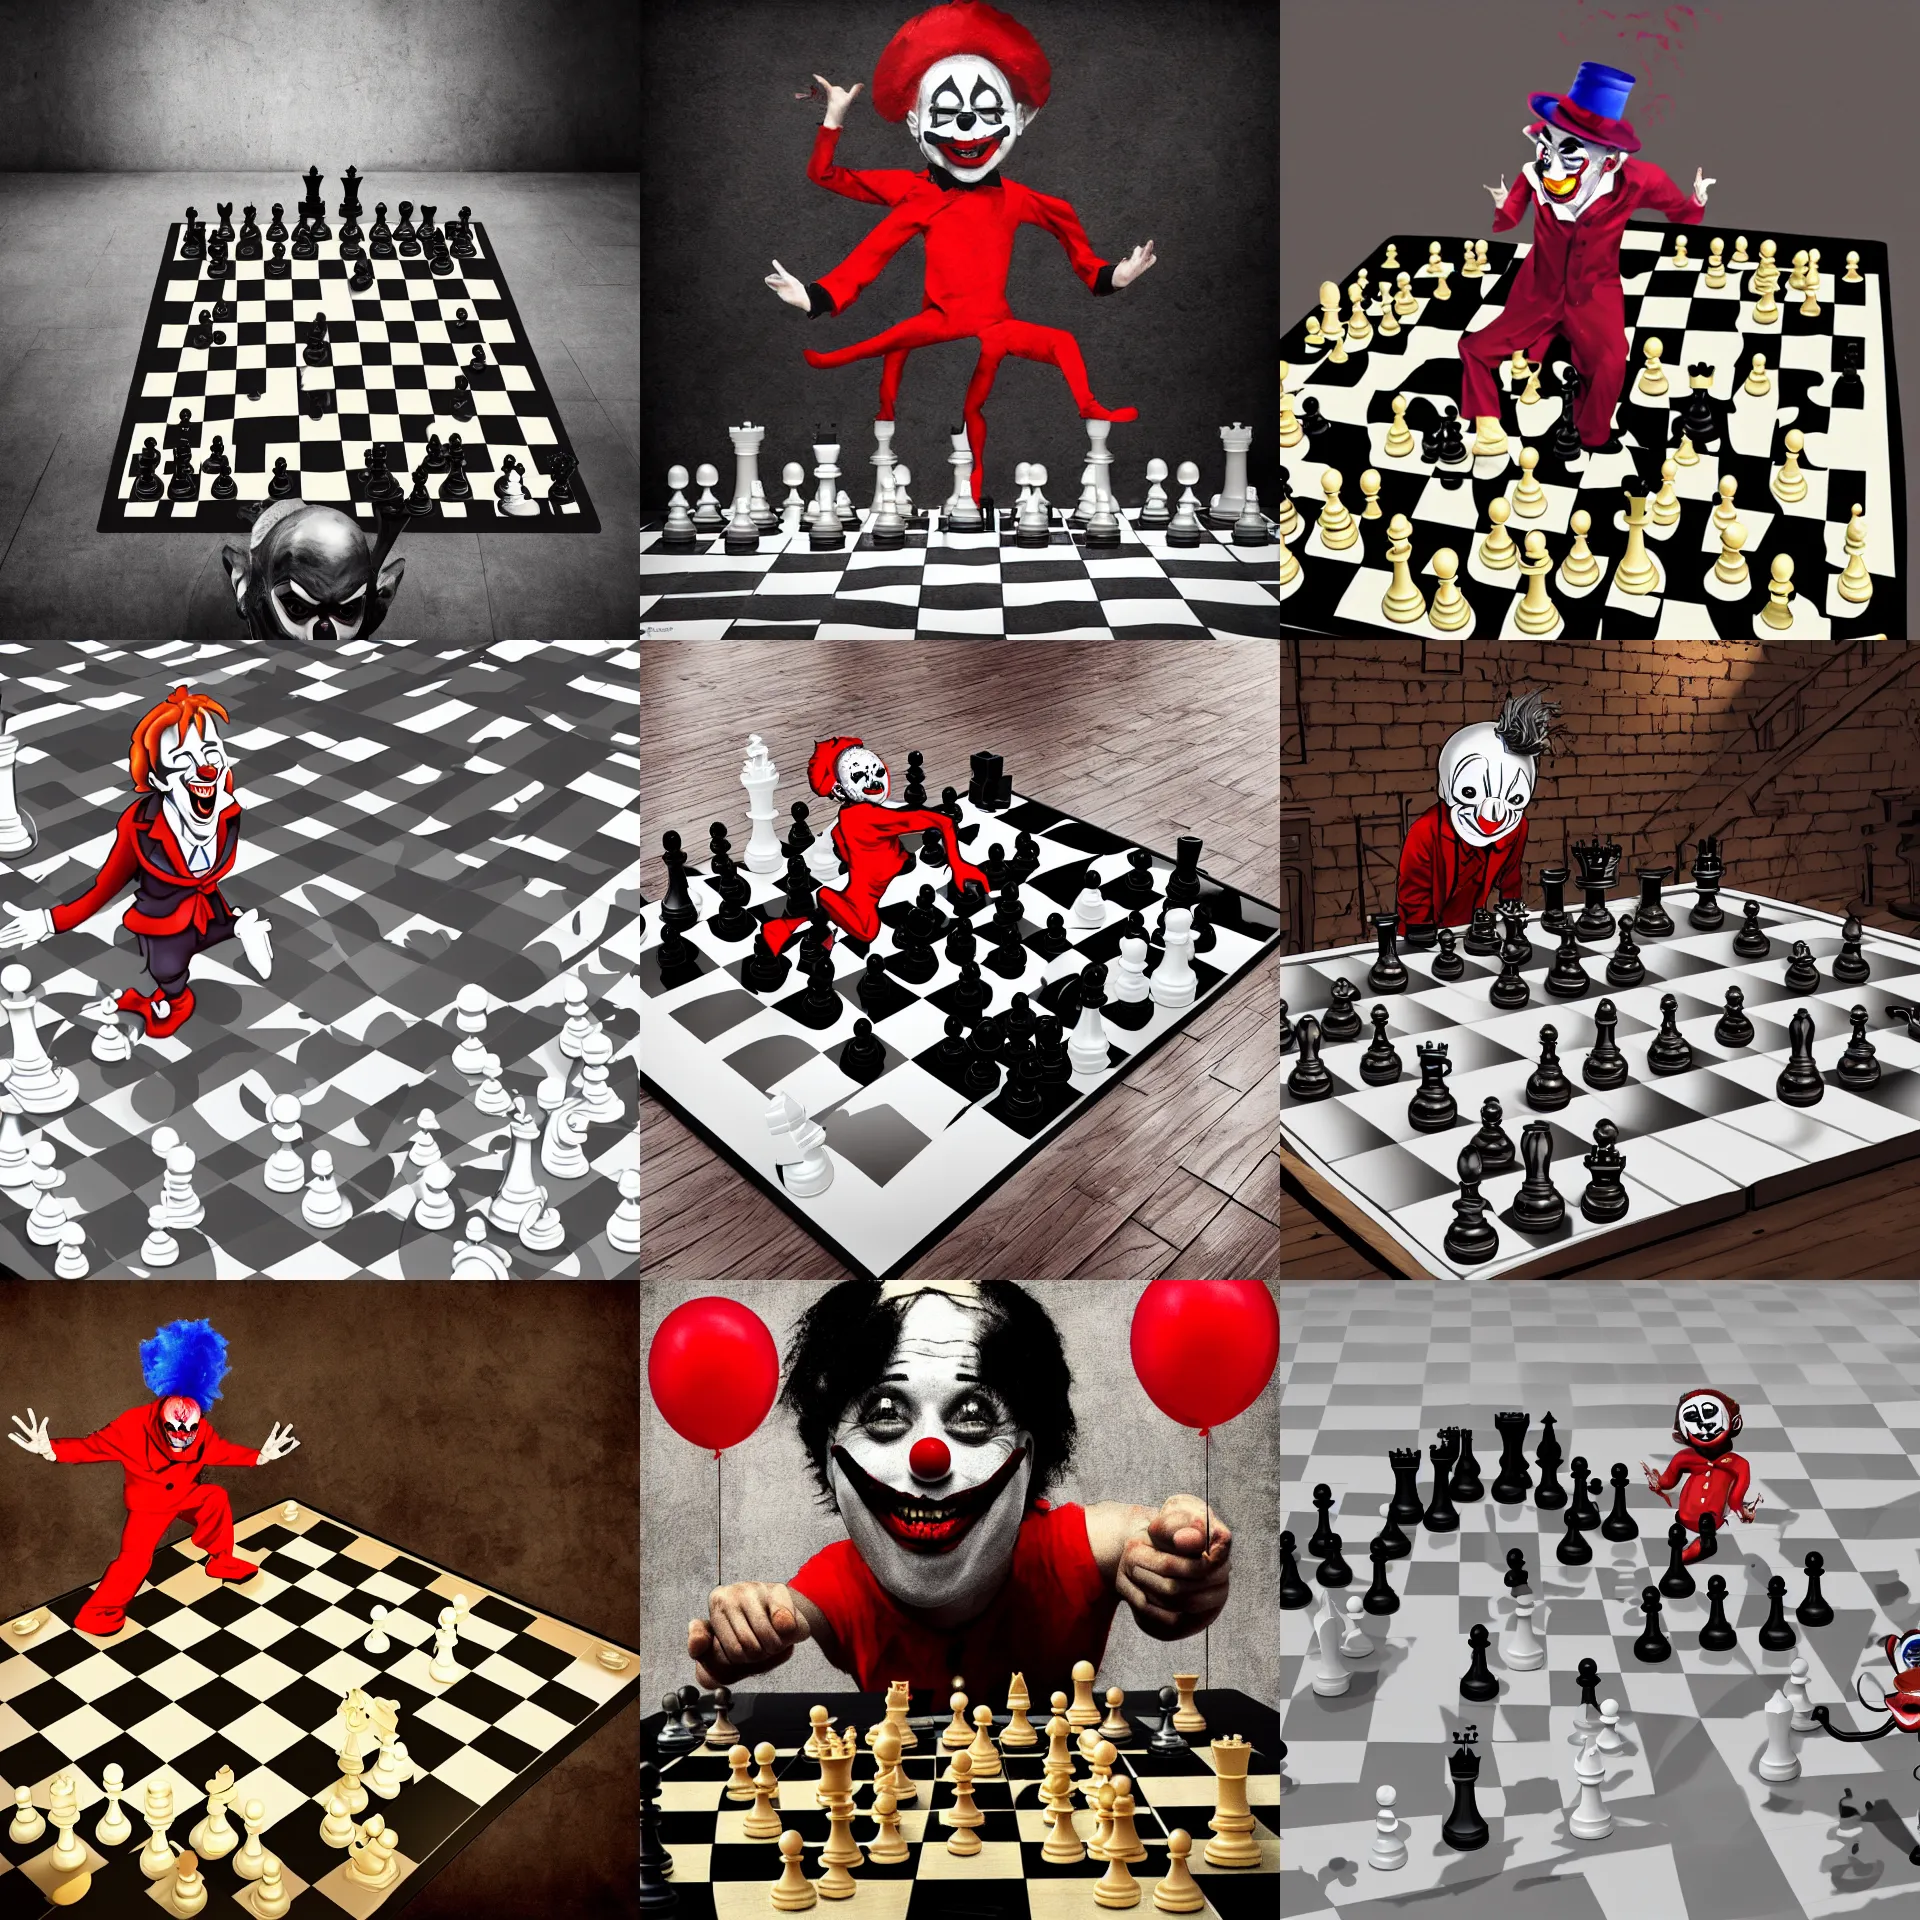 Prompt: a creepy looking clown dancing on a chess table like floor, digital art